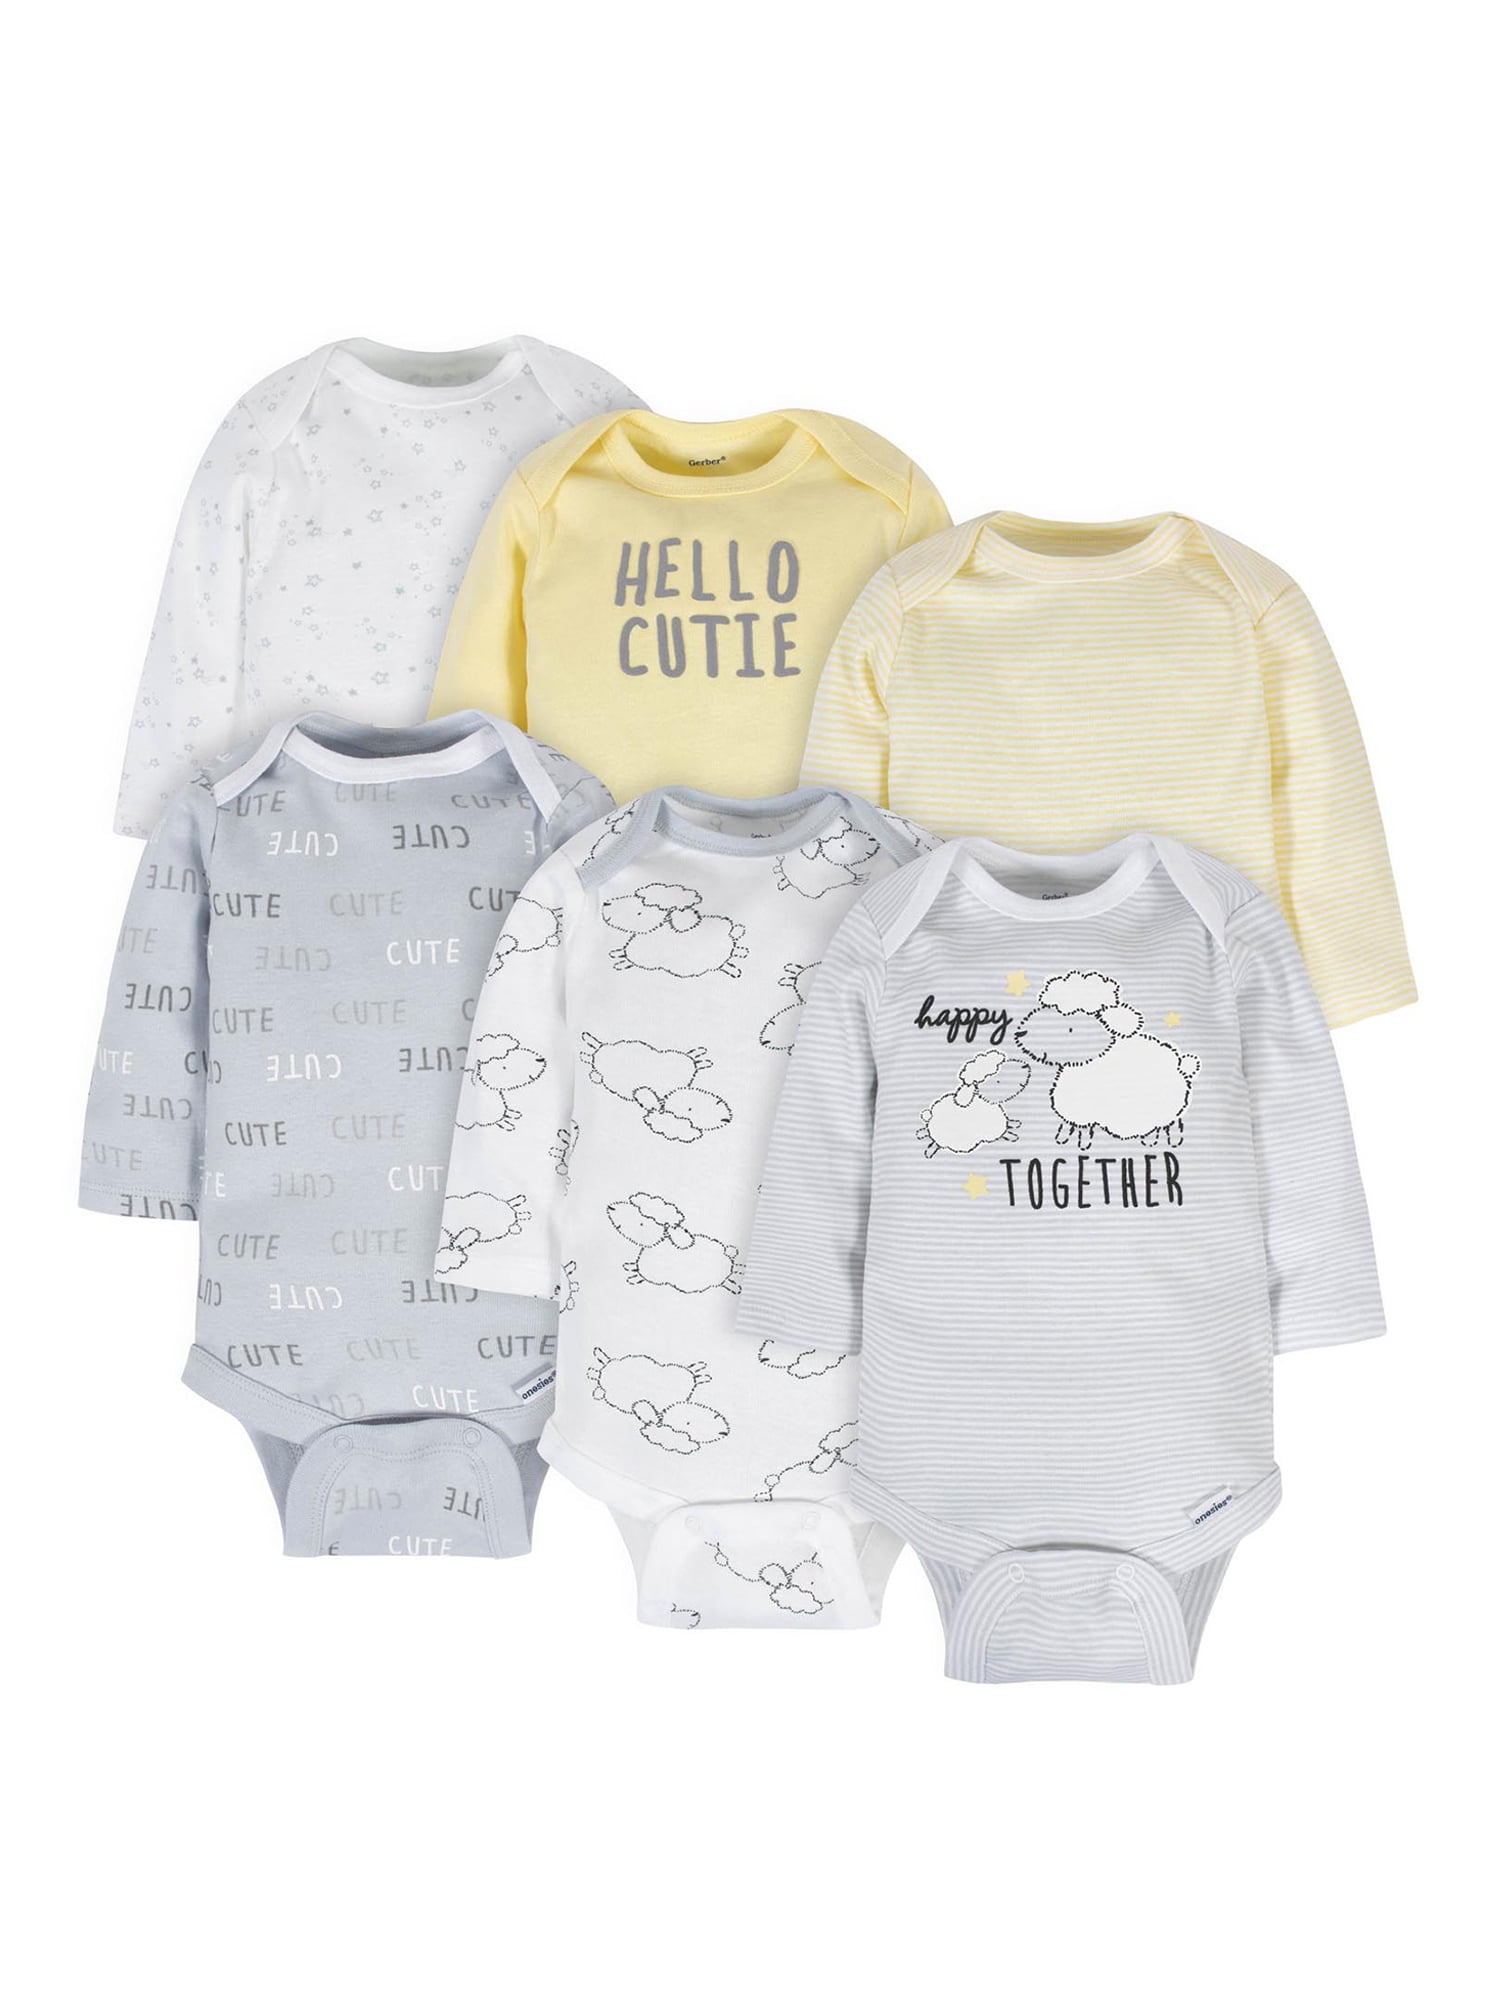 Baby Shower 4 New Gerber Boy's Onesies Seriously Cute or 12 Months 3-6 6-9 